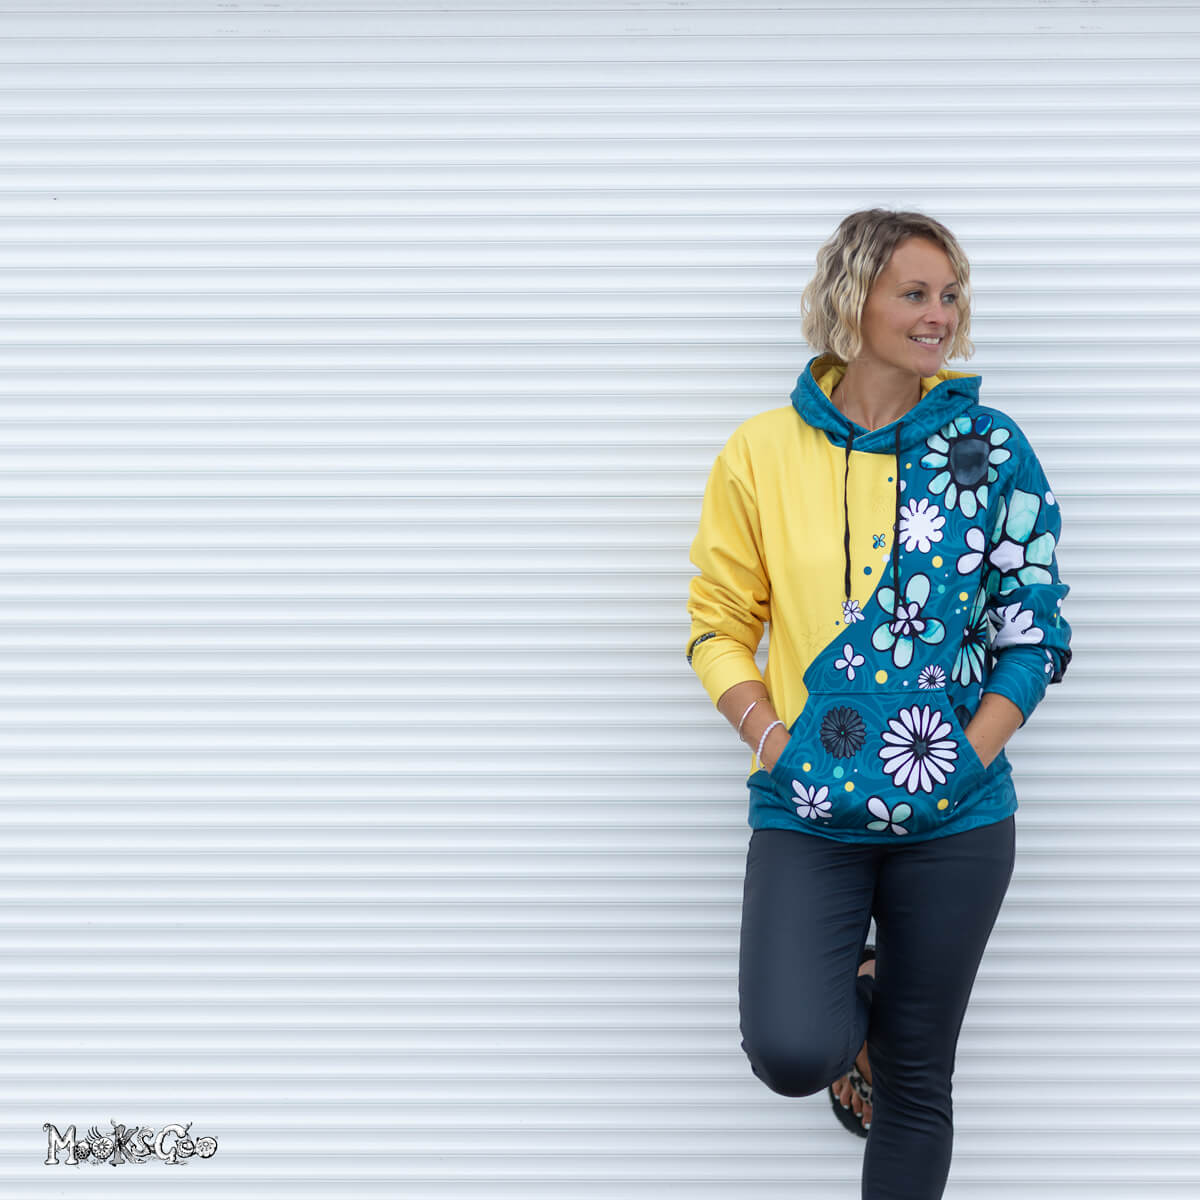 Teal and Mustard yellow colour split unisex hoodie modelled by Michelle Lott (MooksGoo). Photography by Julian Winslow along Shanklin seafront on the Isle of Wight